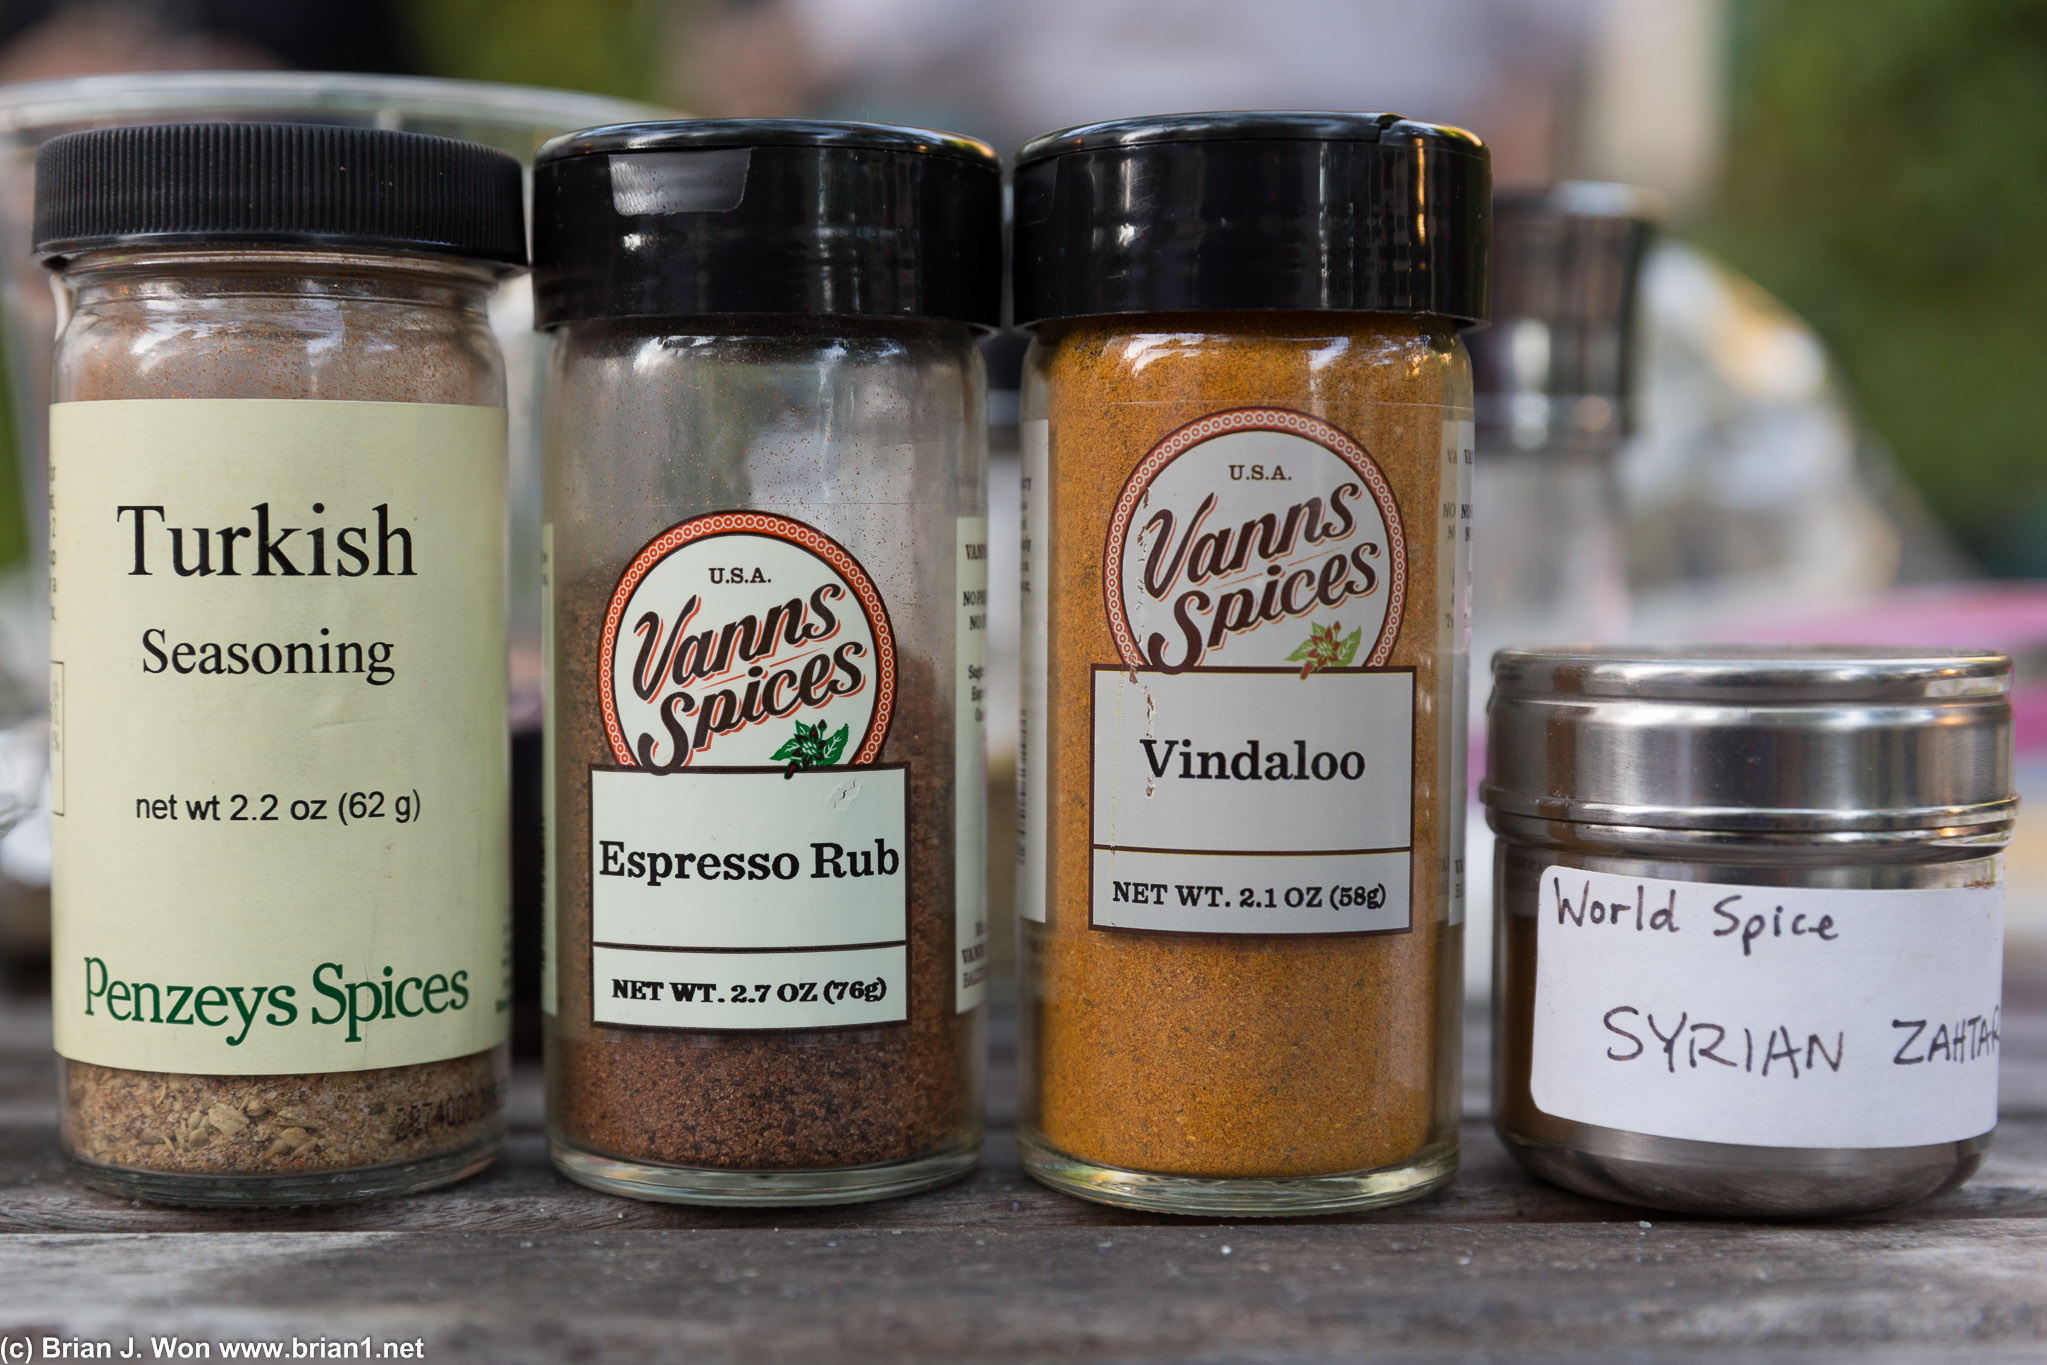 Professor Moore's spice collection.